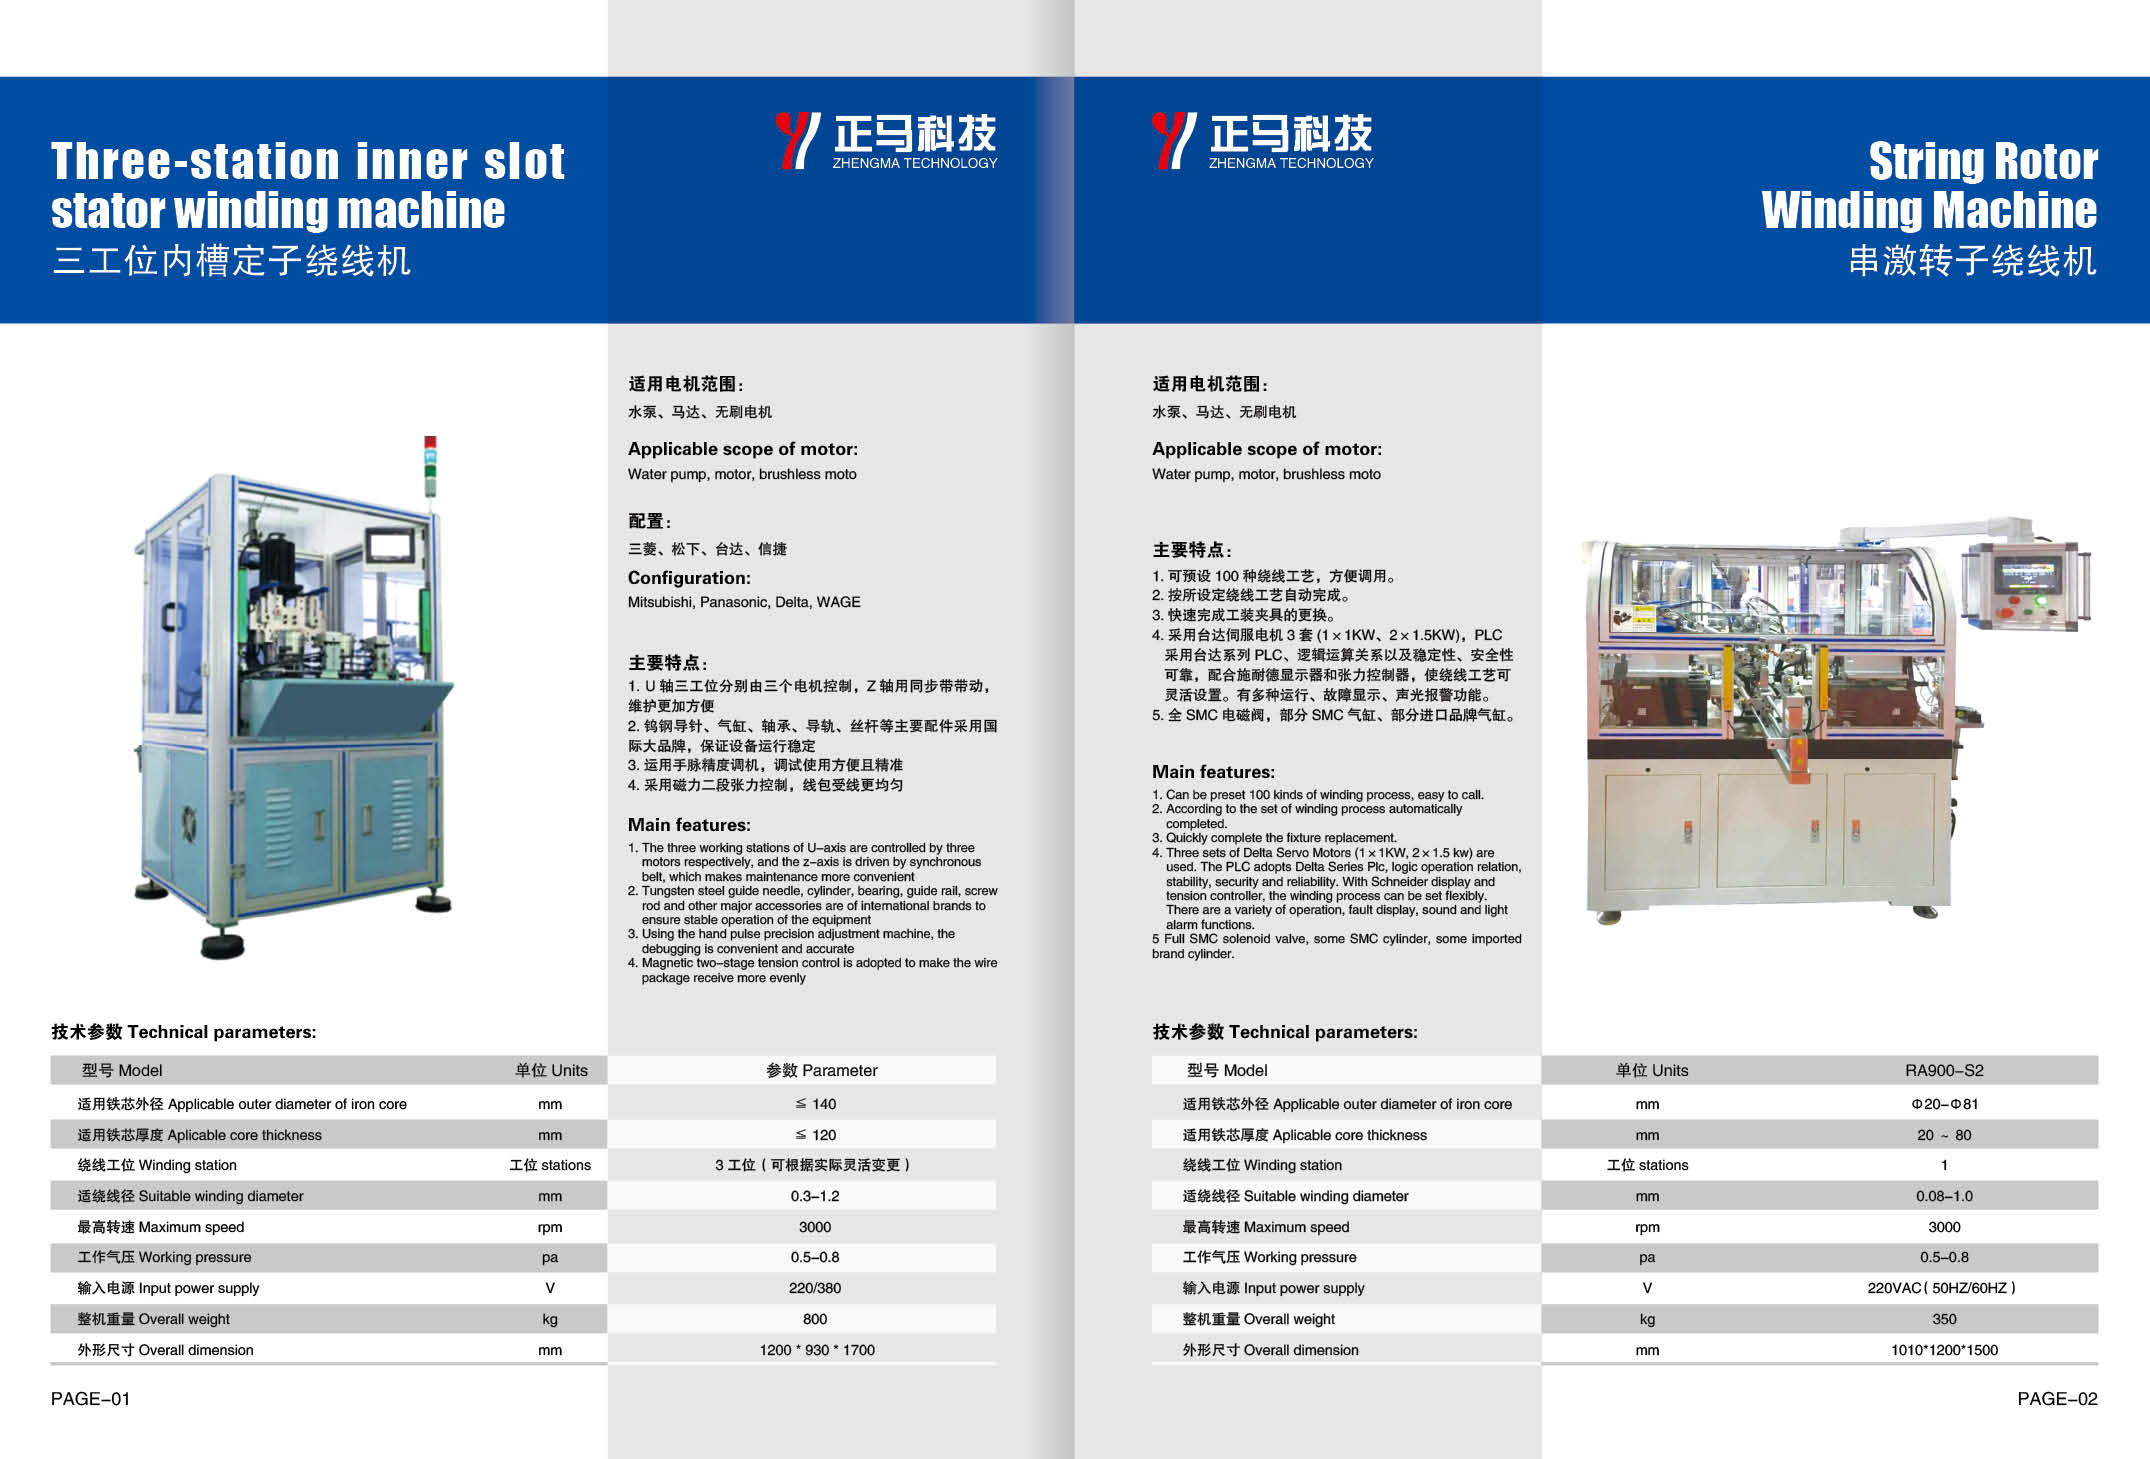 Zhengma New Energy Electric Vehicle Motor Automatic Paper Insertion Machine CCD Efficient and Equipped with Robot